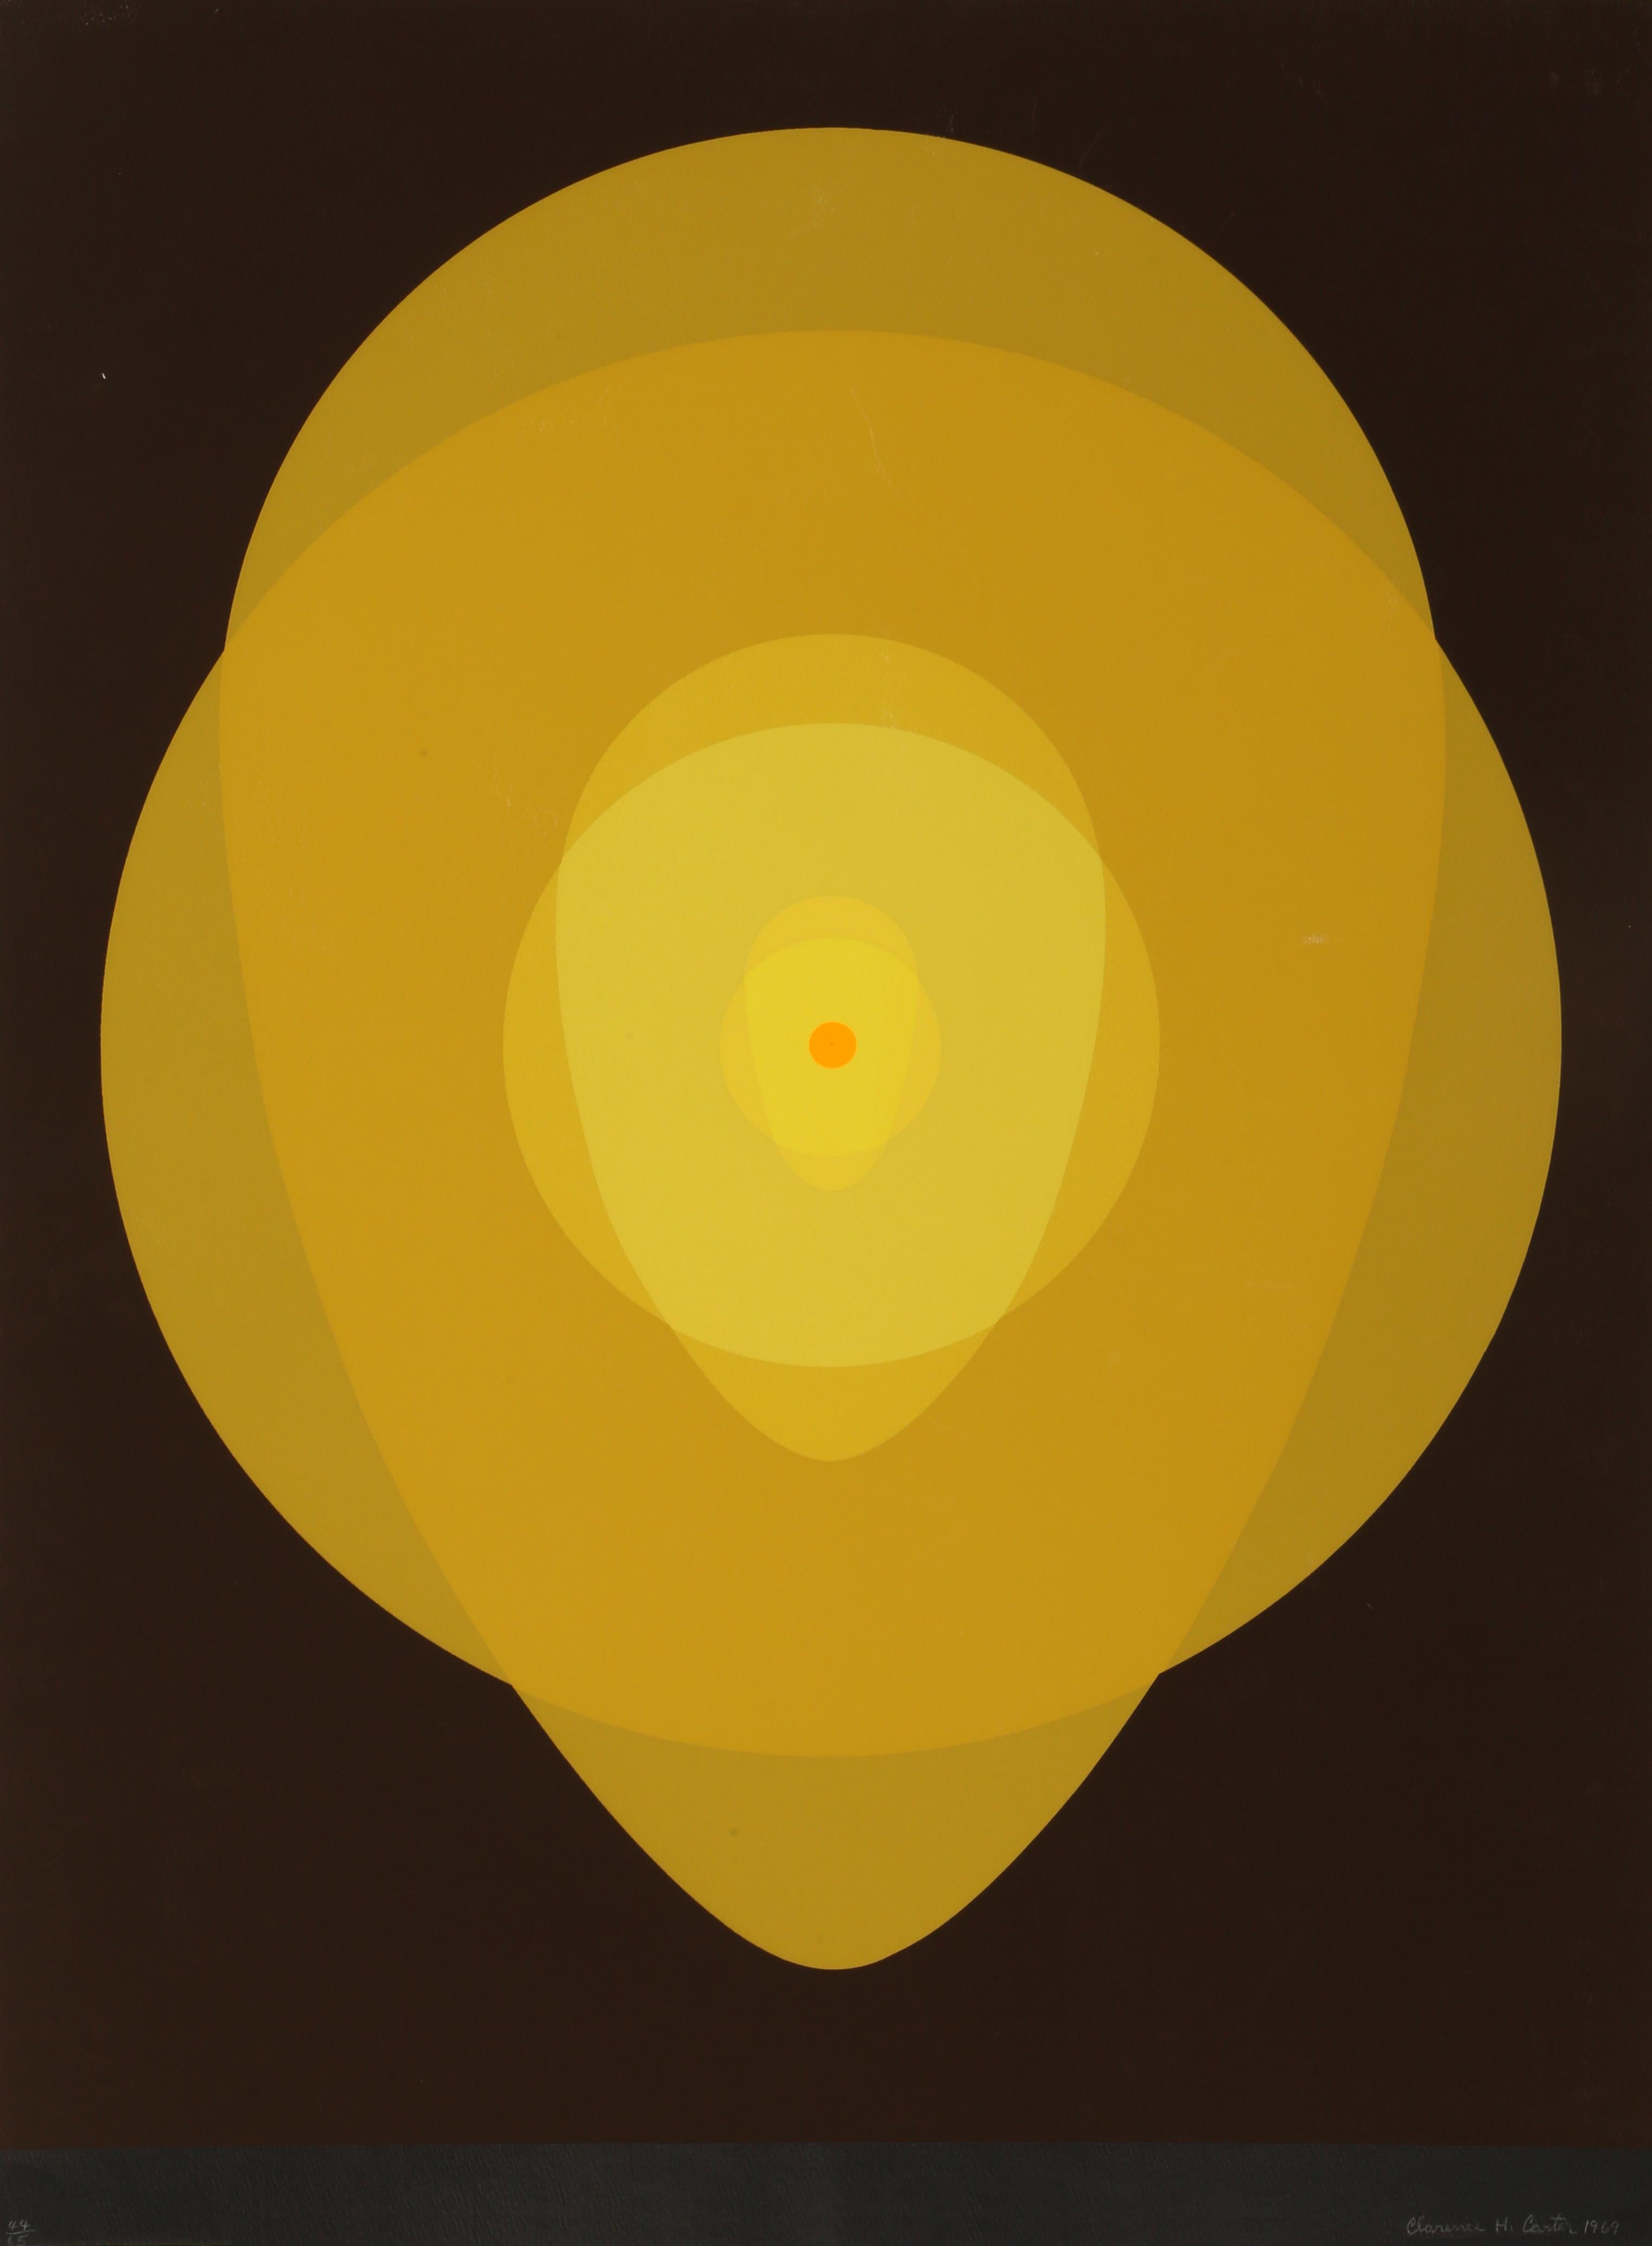 Artist: Clarence Holbrook Carter, American (1904 - 2000)
Title:	Untitled - Yellow Mandala 
Year:	1970
Medium:	Silkscreen, signed and numbered in pencil 
Edition:	65
Paper Size: 30 x 22 inches	